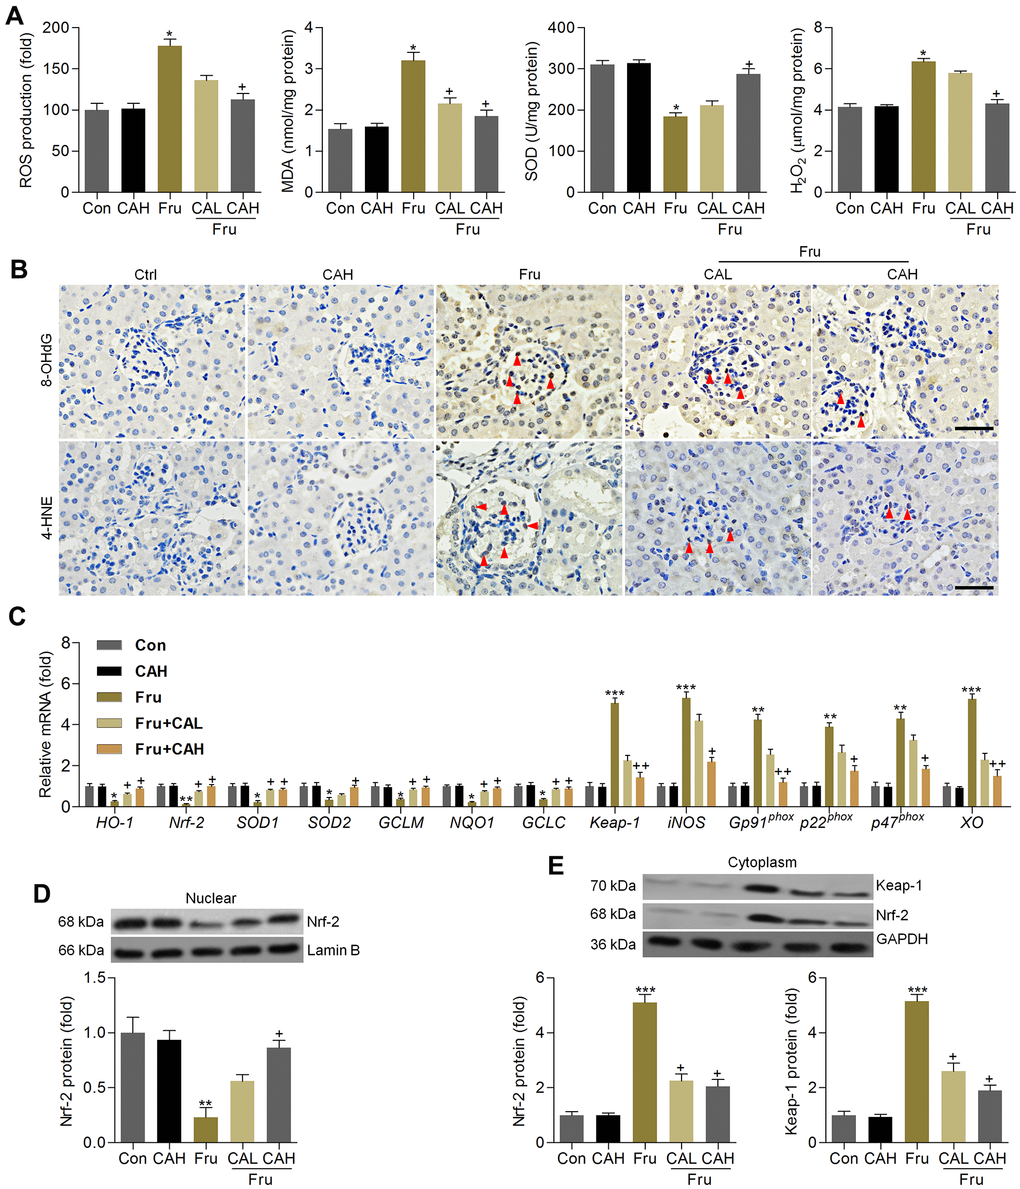 Carminic acid hinds oxidative stress by improving Nrf-2 signaling in kidney of Fru-treated mice. (A) Assessments of ROS production, MDA levels, SOD activity and H2O2 levels in kidney samples of mice. n = 8 in each group. (B) Immunohistochemistry analysis for 8-OHdG and 4-HNE in renal sections (Scale bar = 50 μm). Red arrows indicated the positive-staining area. n = 4 in each group. (C) Oxidative stress-associated genes were measured by RT-qPCR analysis. n = 4 in each group. (D) Nuclear Nrf-2, (E) cytoplastic Keap-1 and Nrf-2 protein expression levels were evaluated using western blotting assays. n = 4 in each group. The results are expressed as the means ± SEM. *P**P**P+P++P